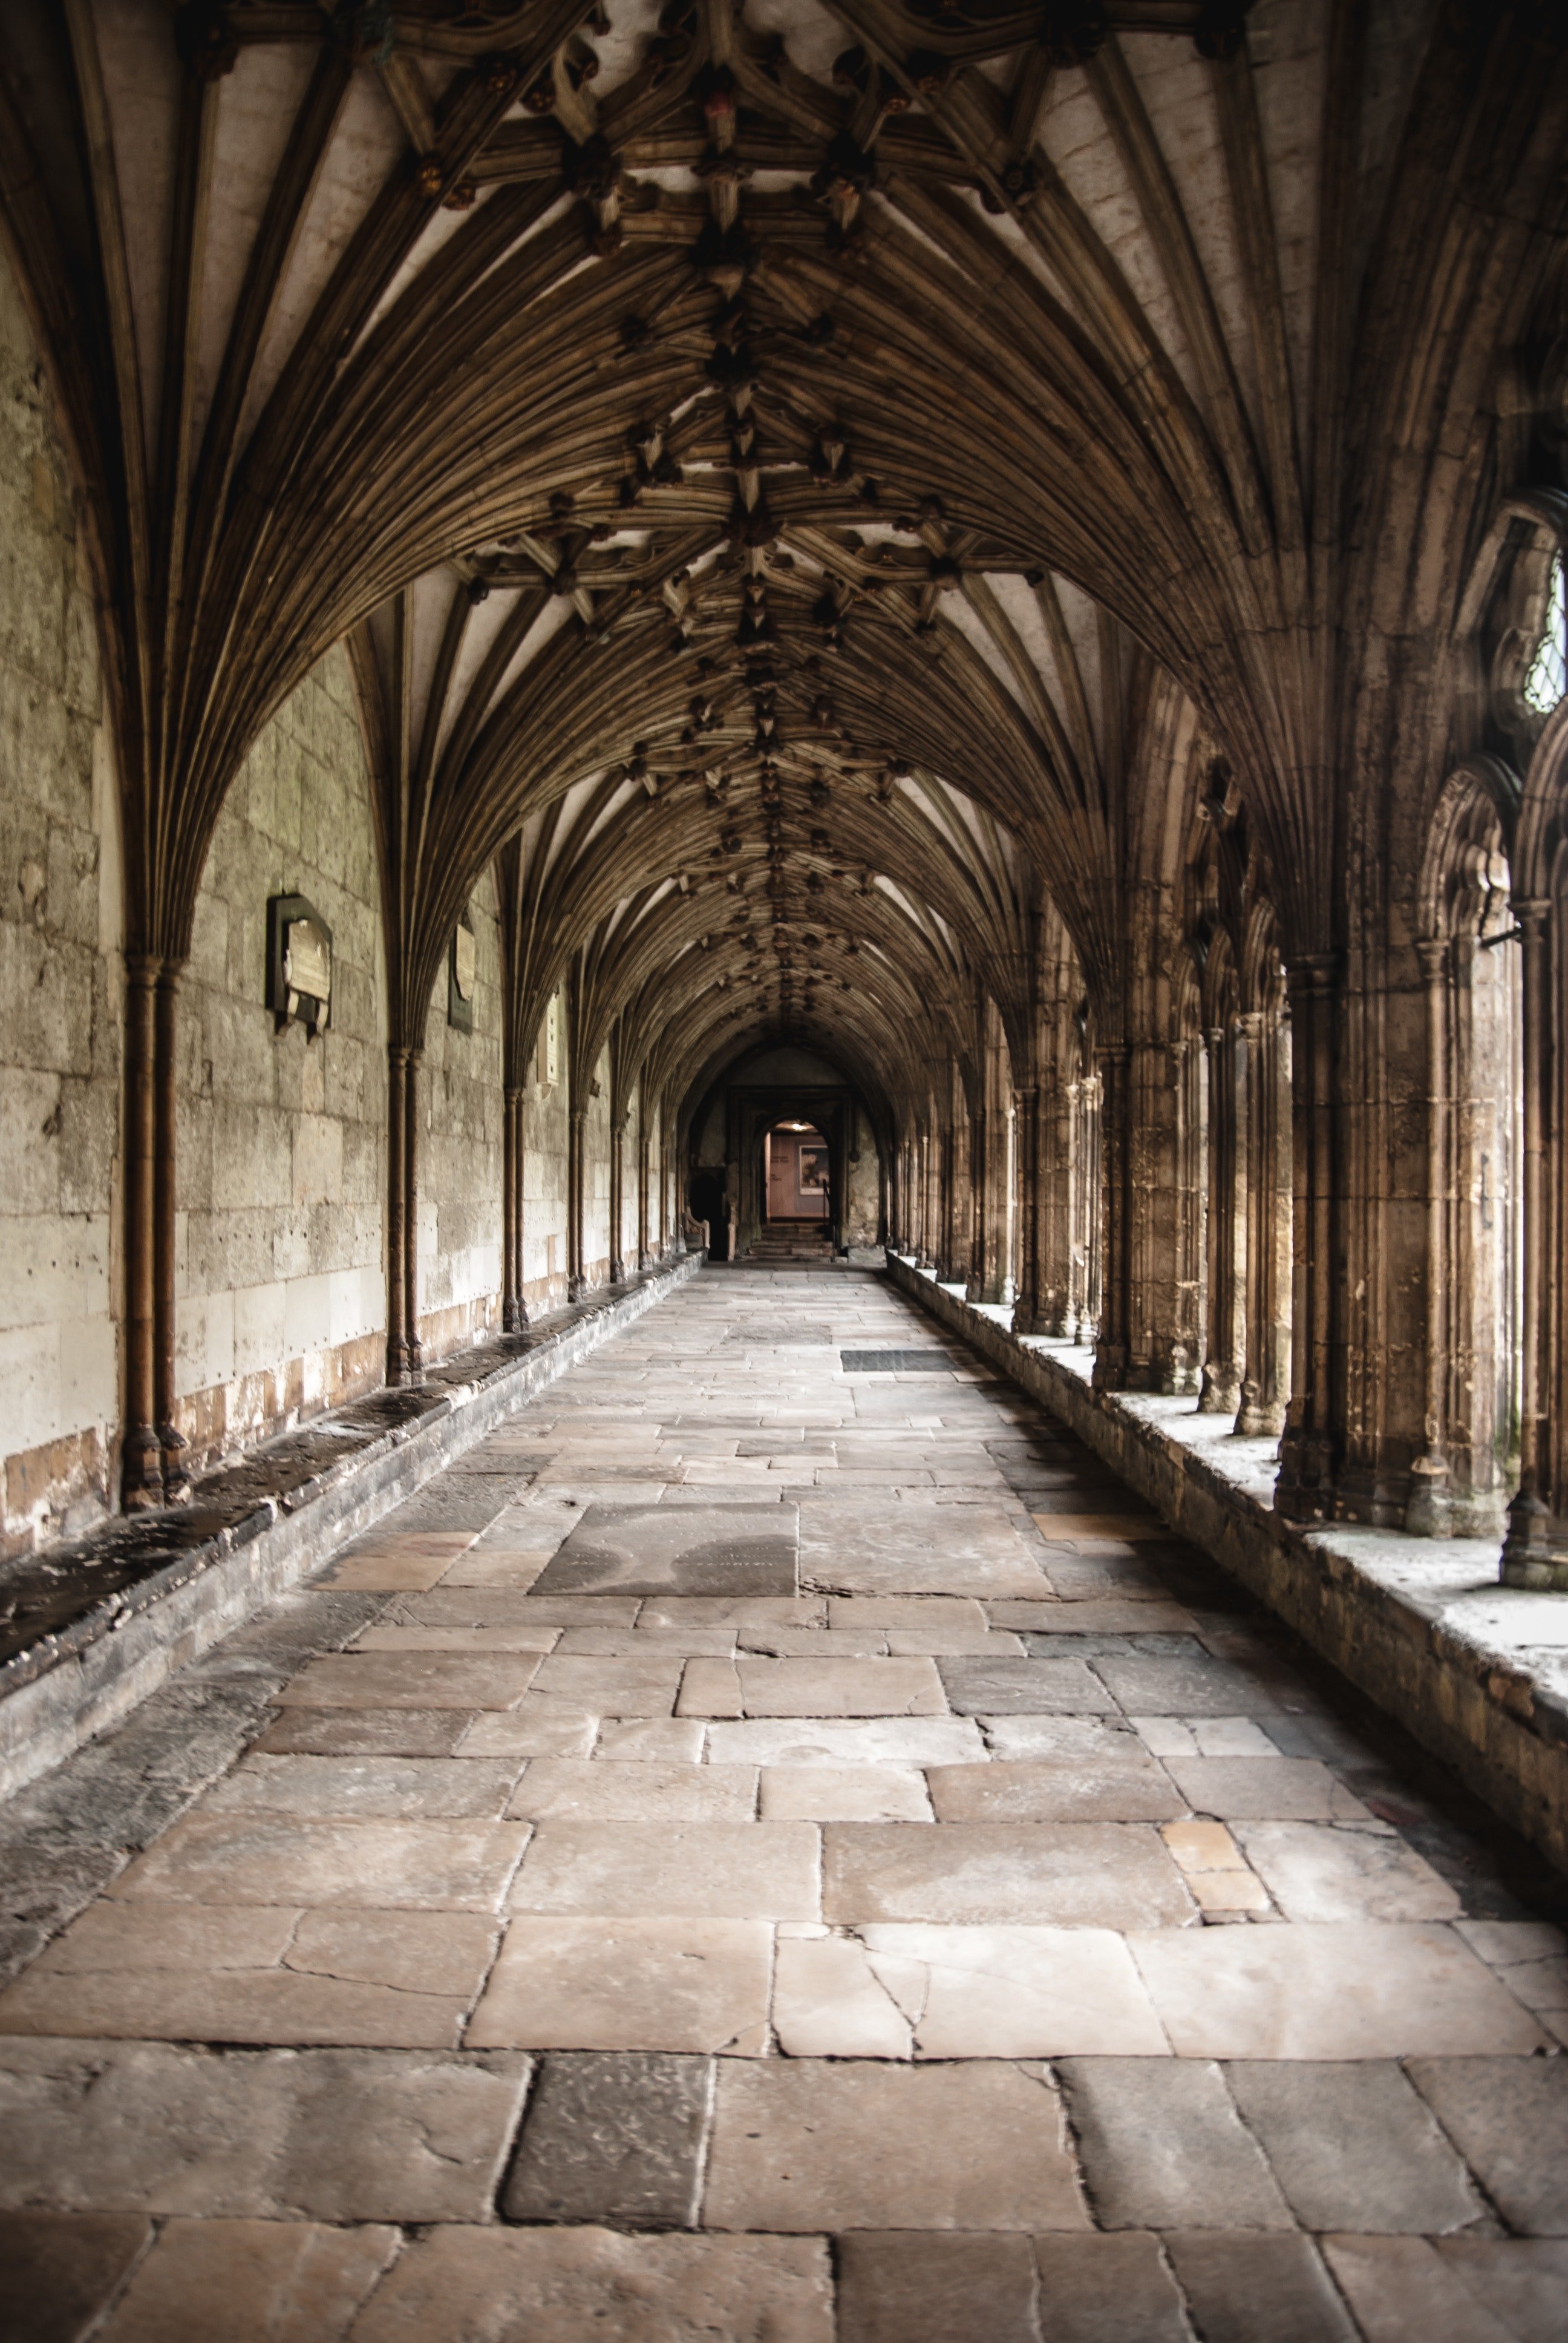 The monk led the stranger through a set of winding corridors in the monastery. | Photo: Pexels/Samuel Wölfl